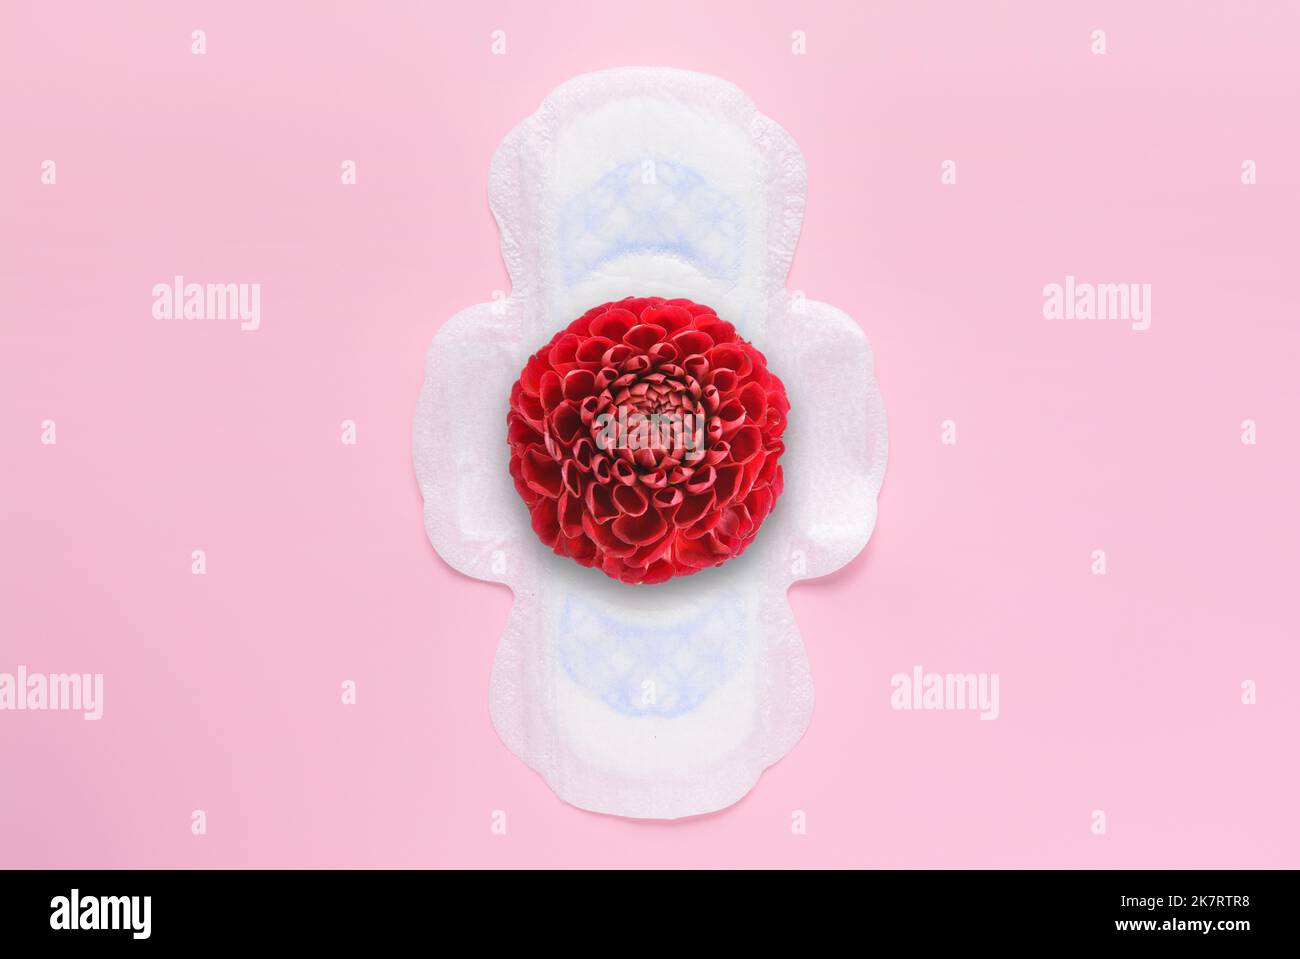 Menstrual pad with red flower on pink background Stock Photo